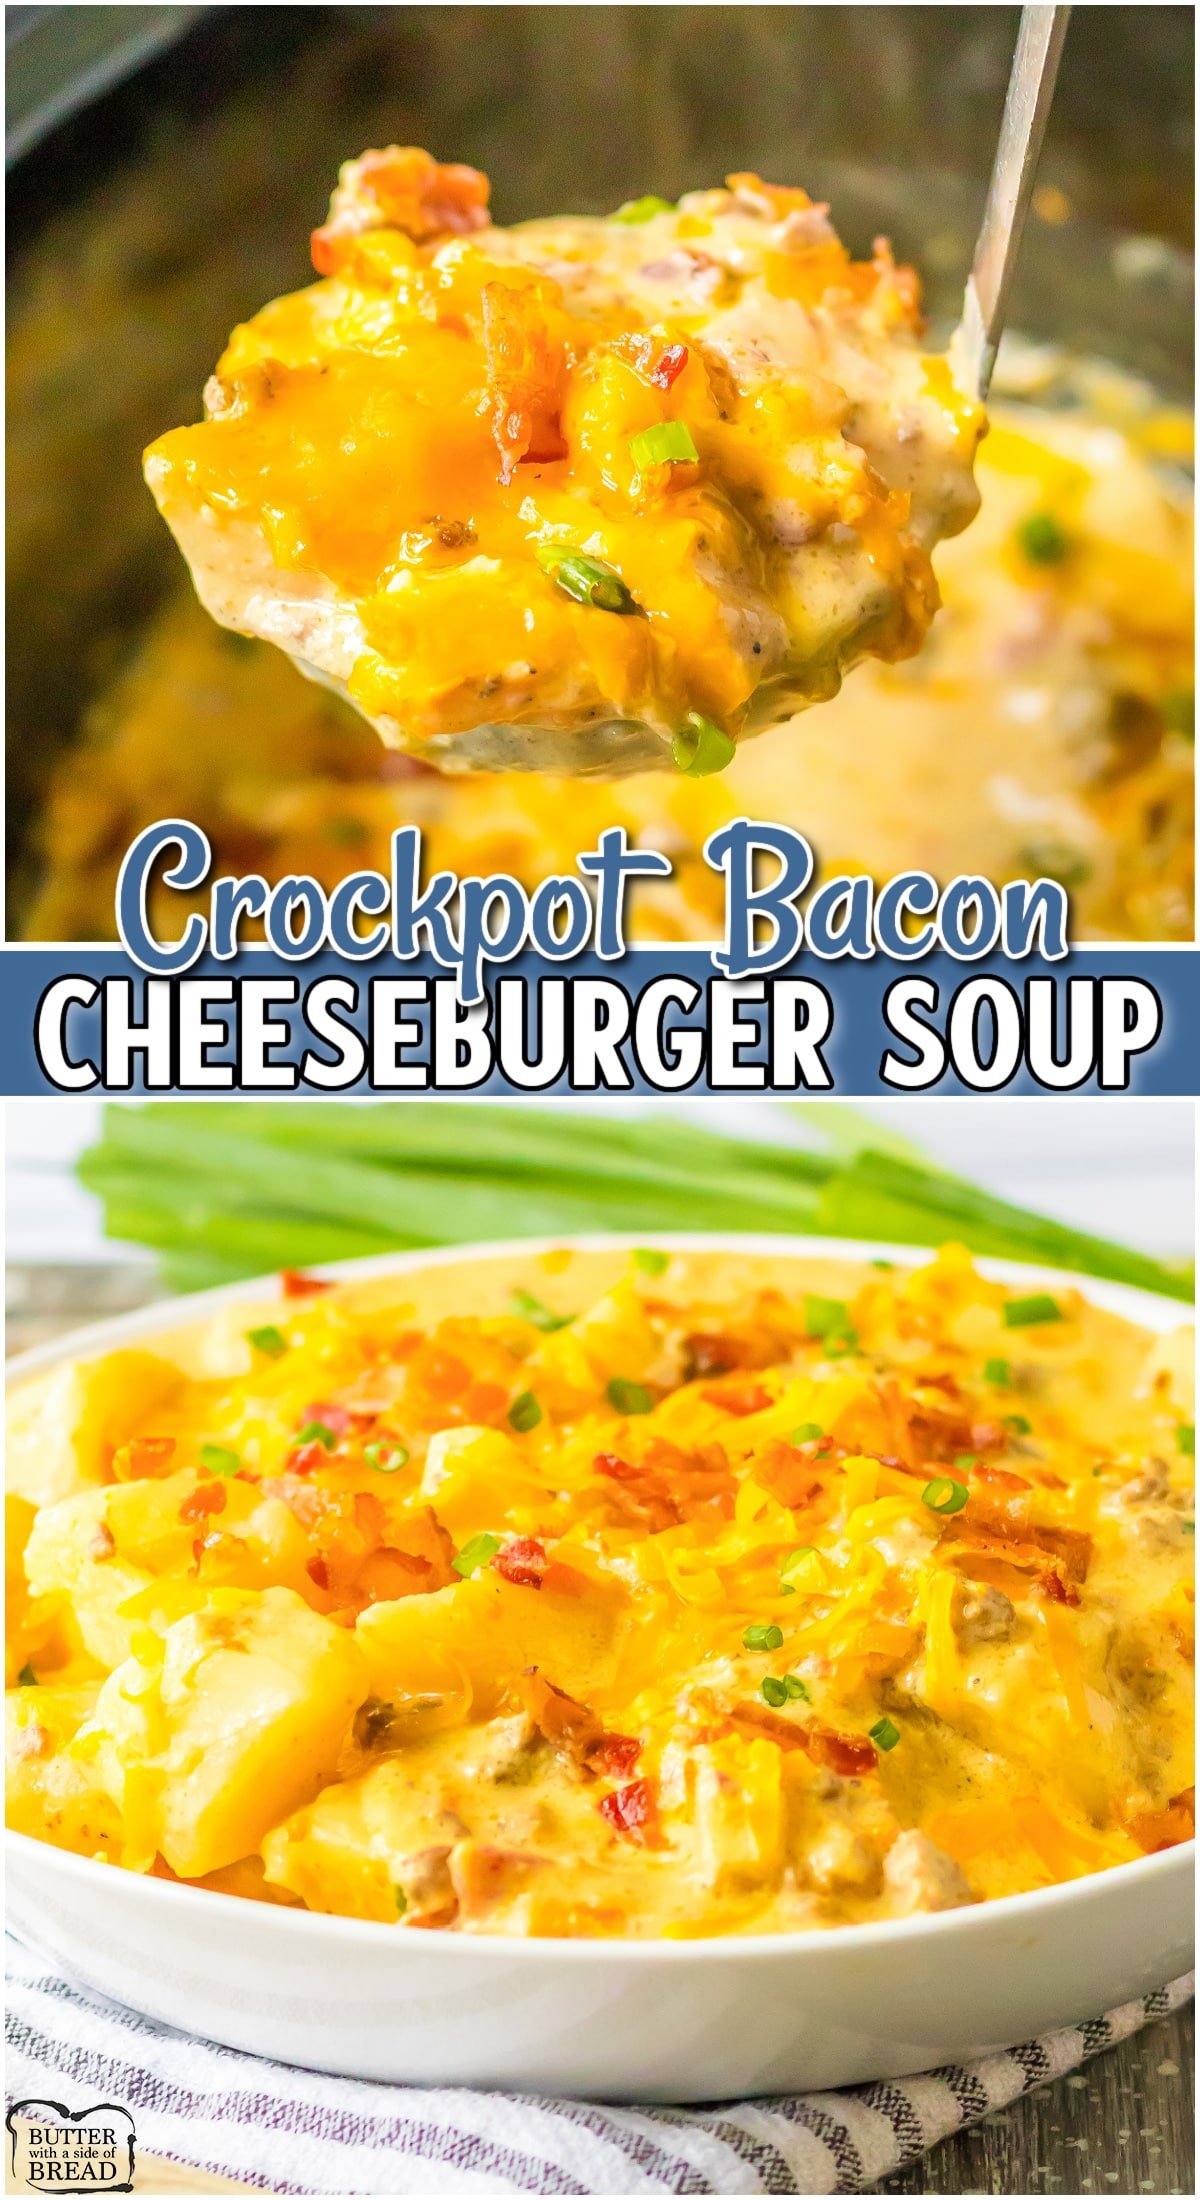 Crockpot Cheeseburger Soup is a hearty dinner full of flavor! This creamy hamburger soup recipe is made with ground beef, bacon, potatoes & a blend of savory seasonings everyone loves!